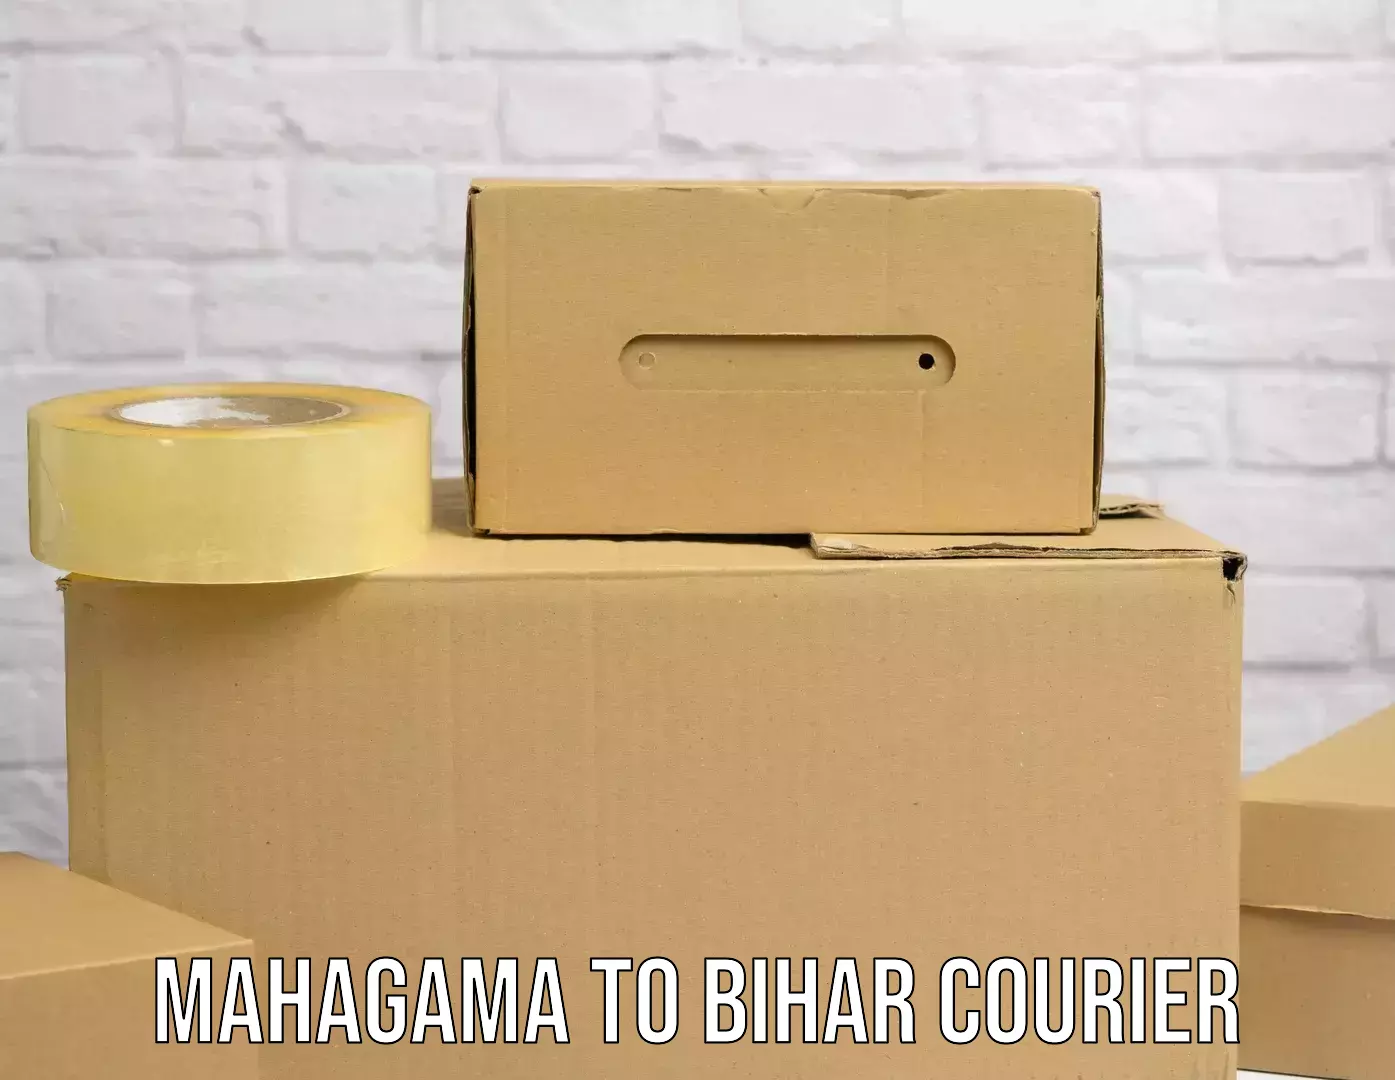 End-to-end delivery Mahagama to Bihar